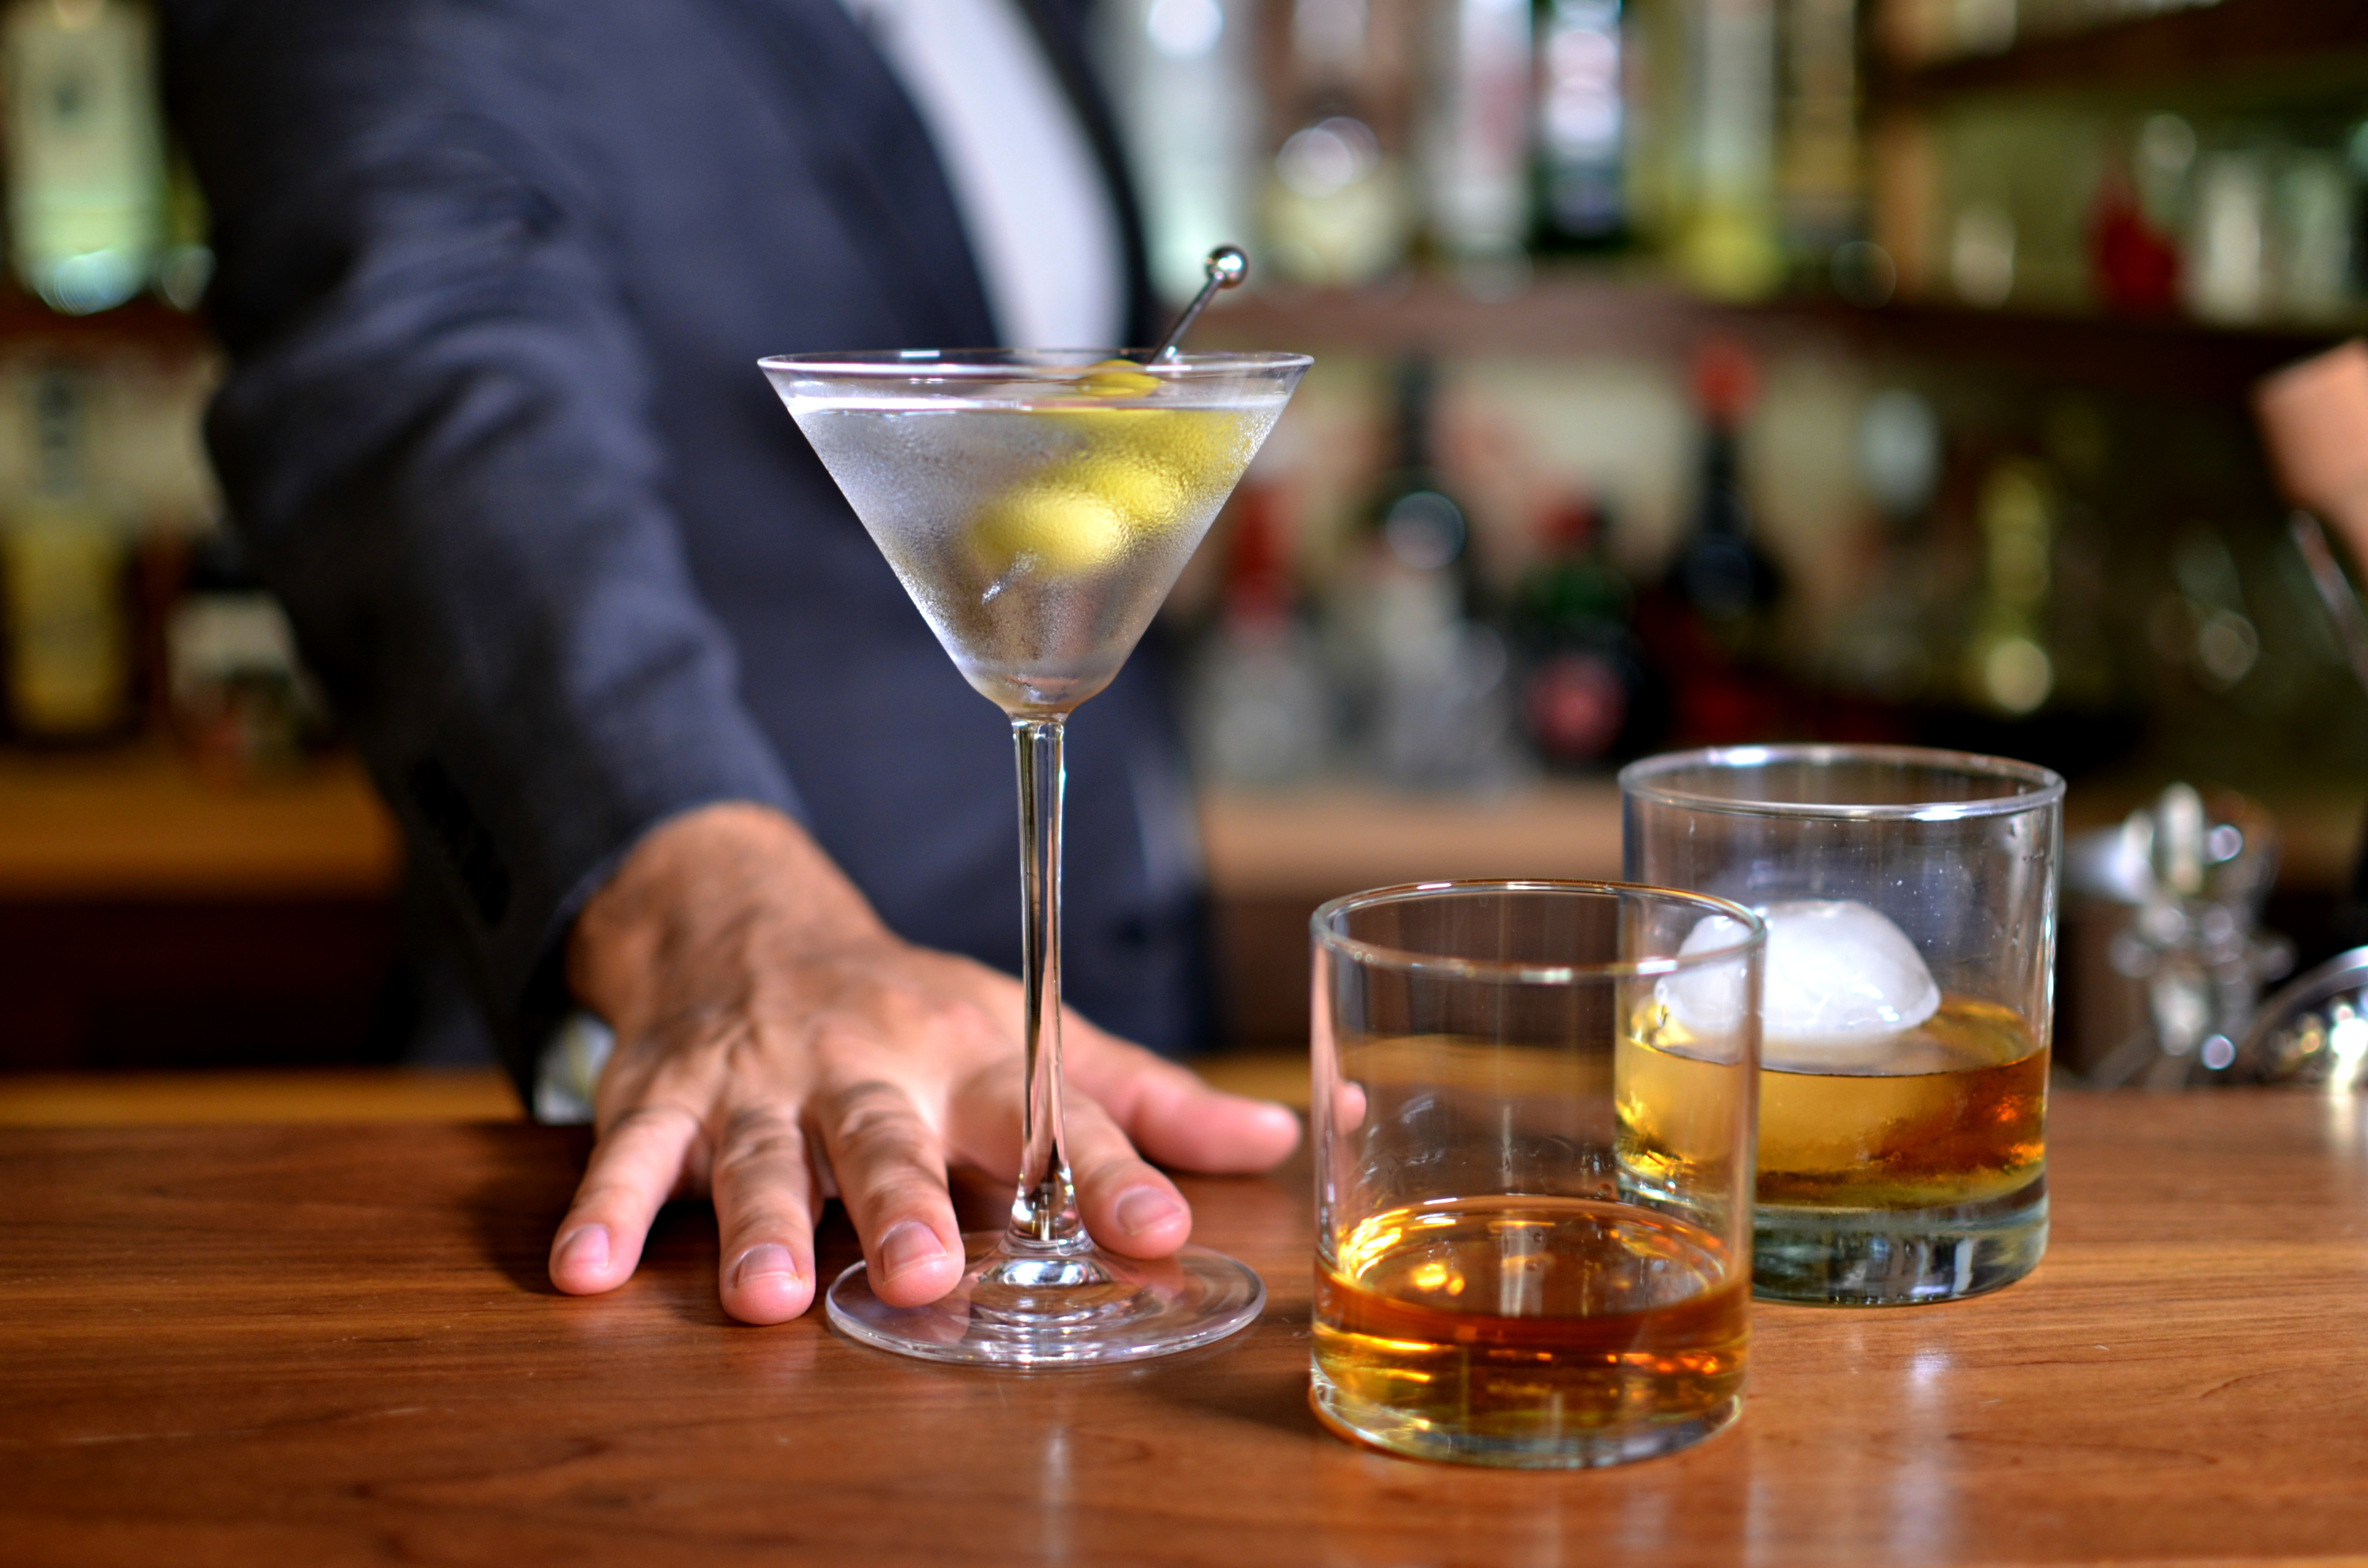 Bartender Lingo: The Words Behind the Stick